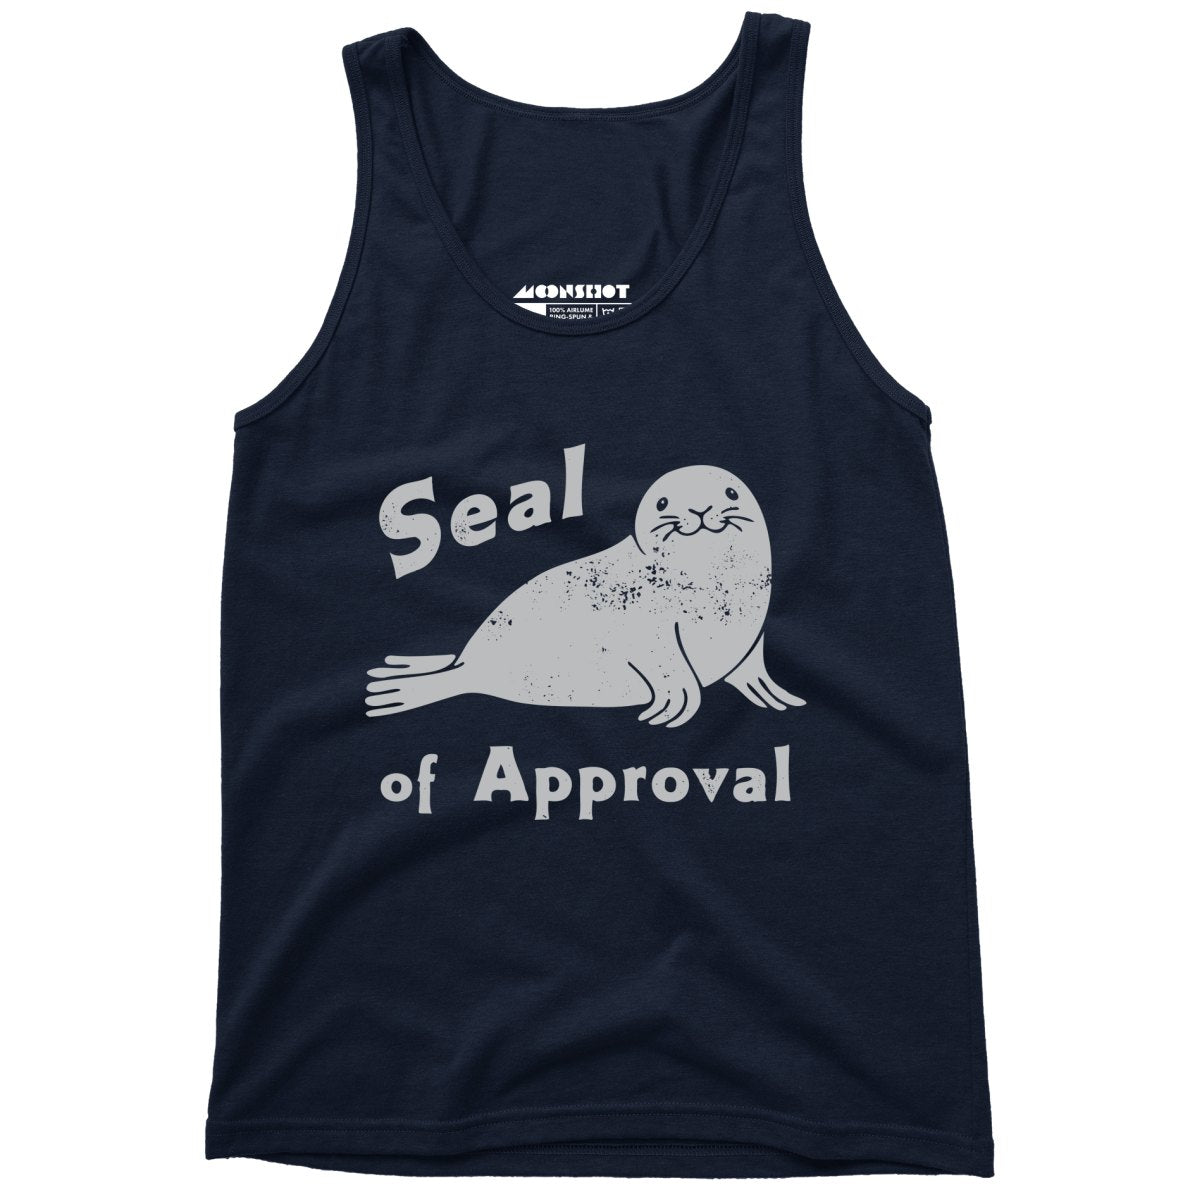 Seal of Approval - Unisex Tank Top